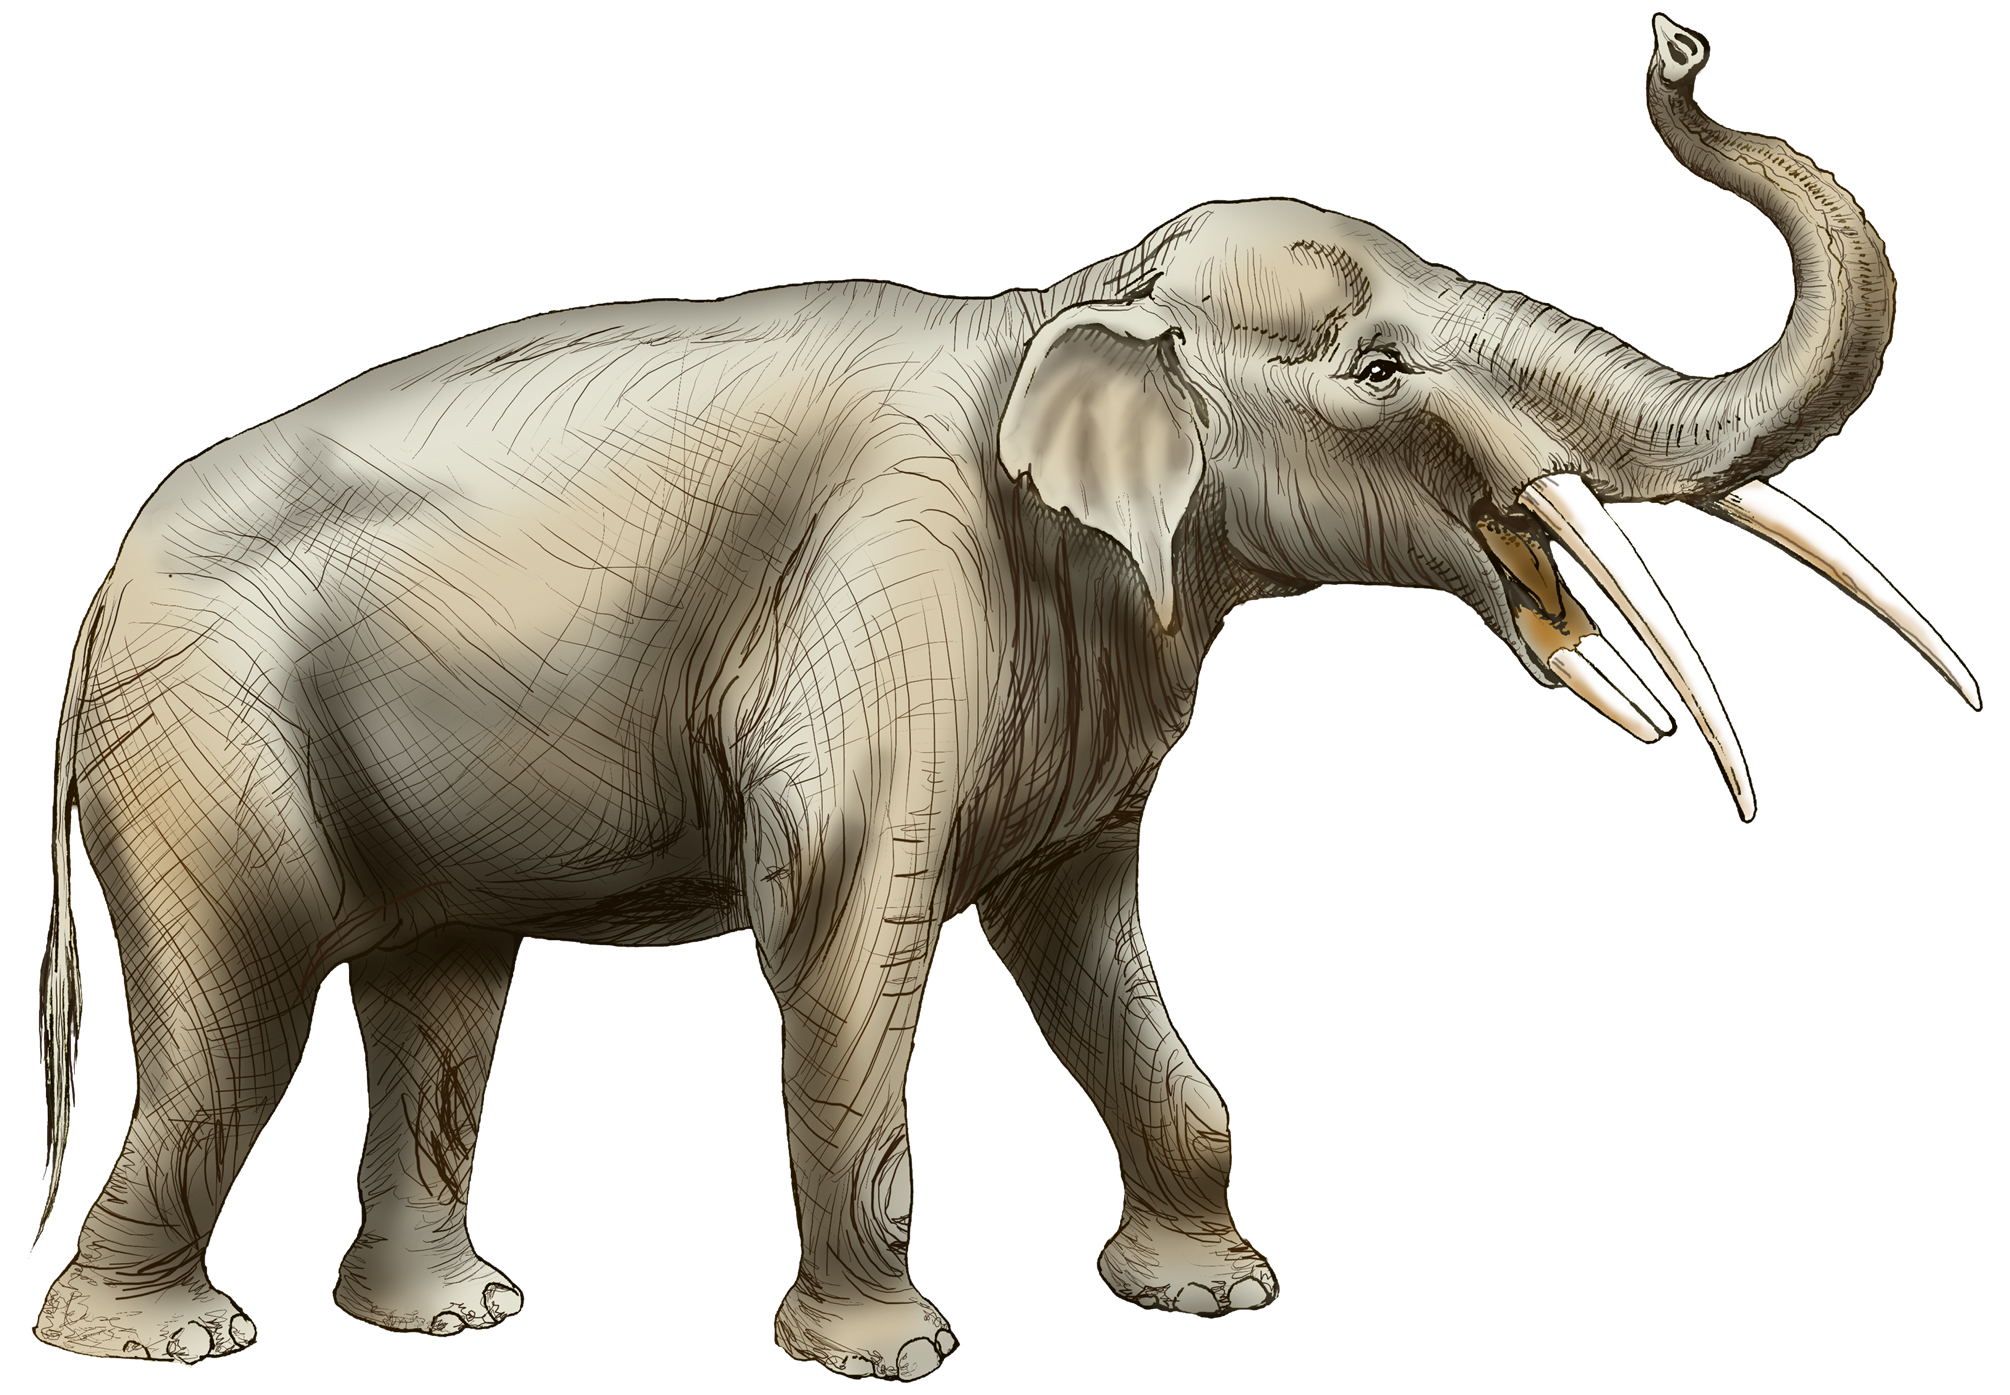 An illustration of a gomphothere, which looks like an elephant with tusks coming from its lower and upper jaws.